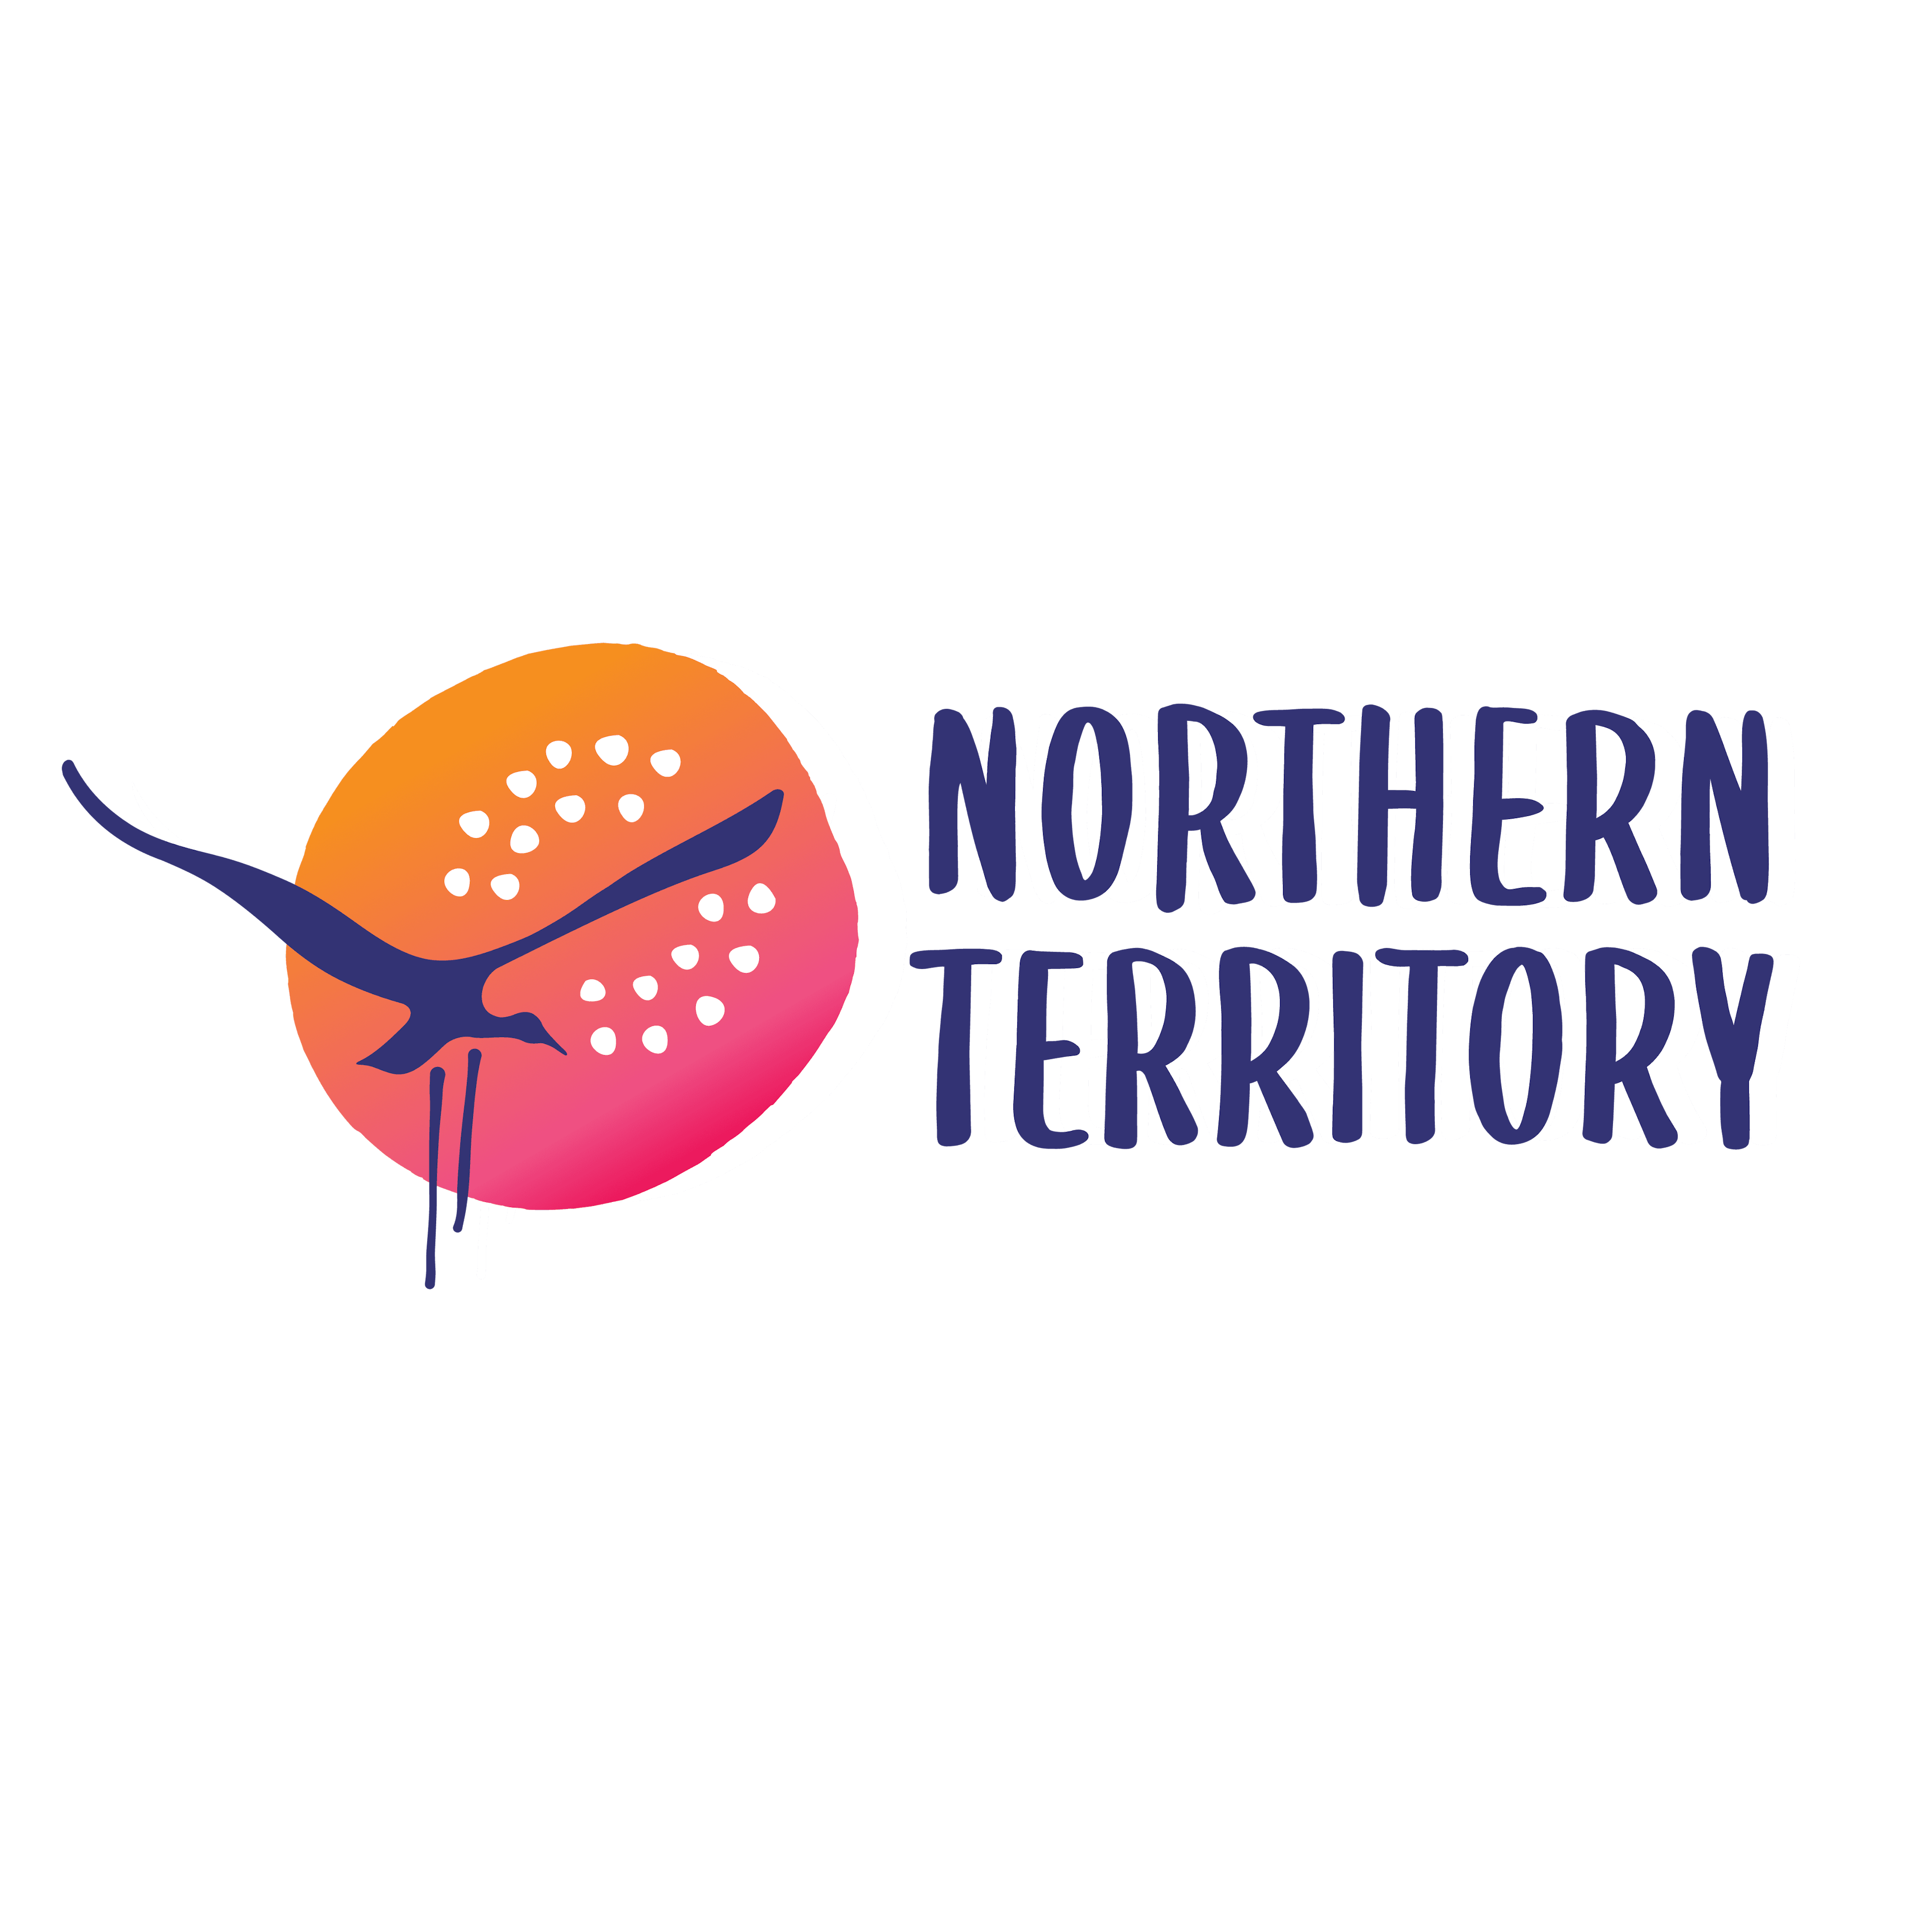 Tourism Northern Territory